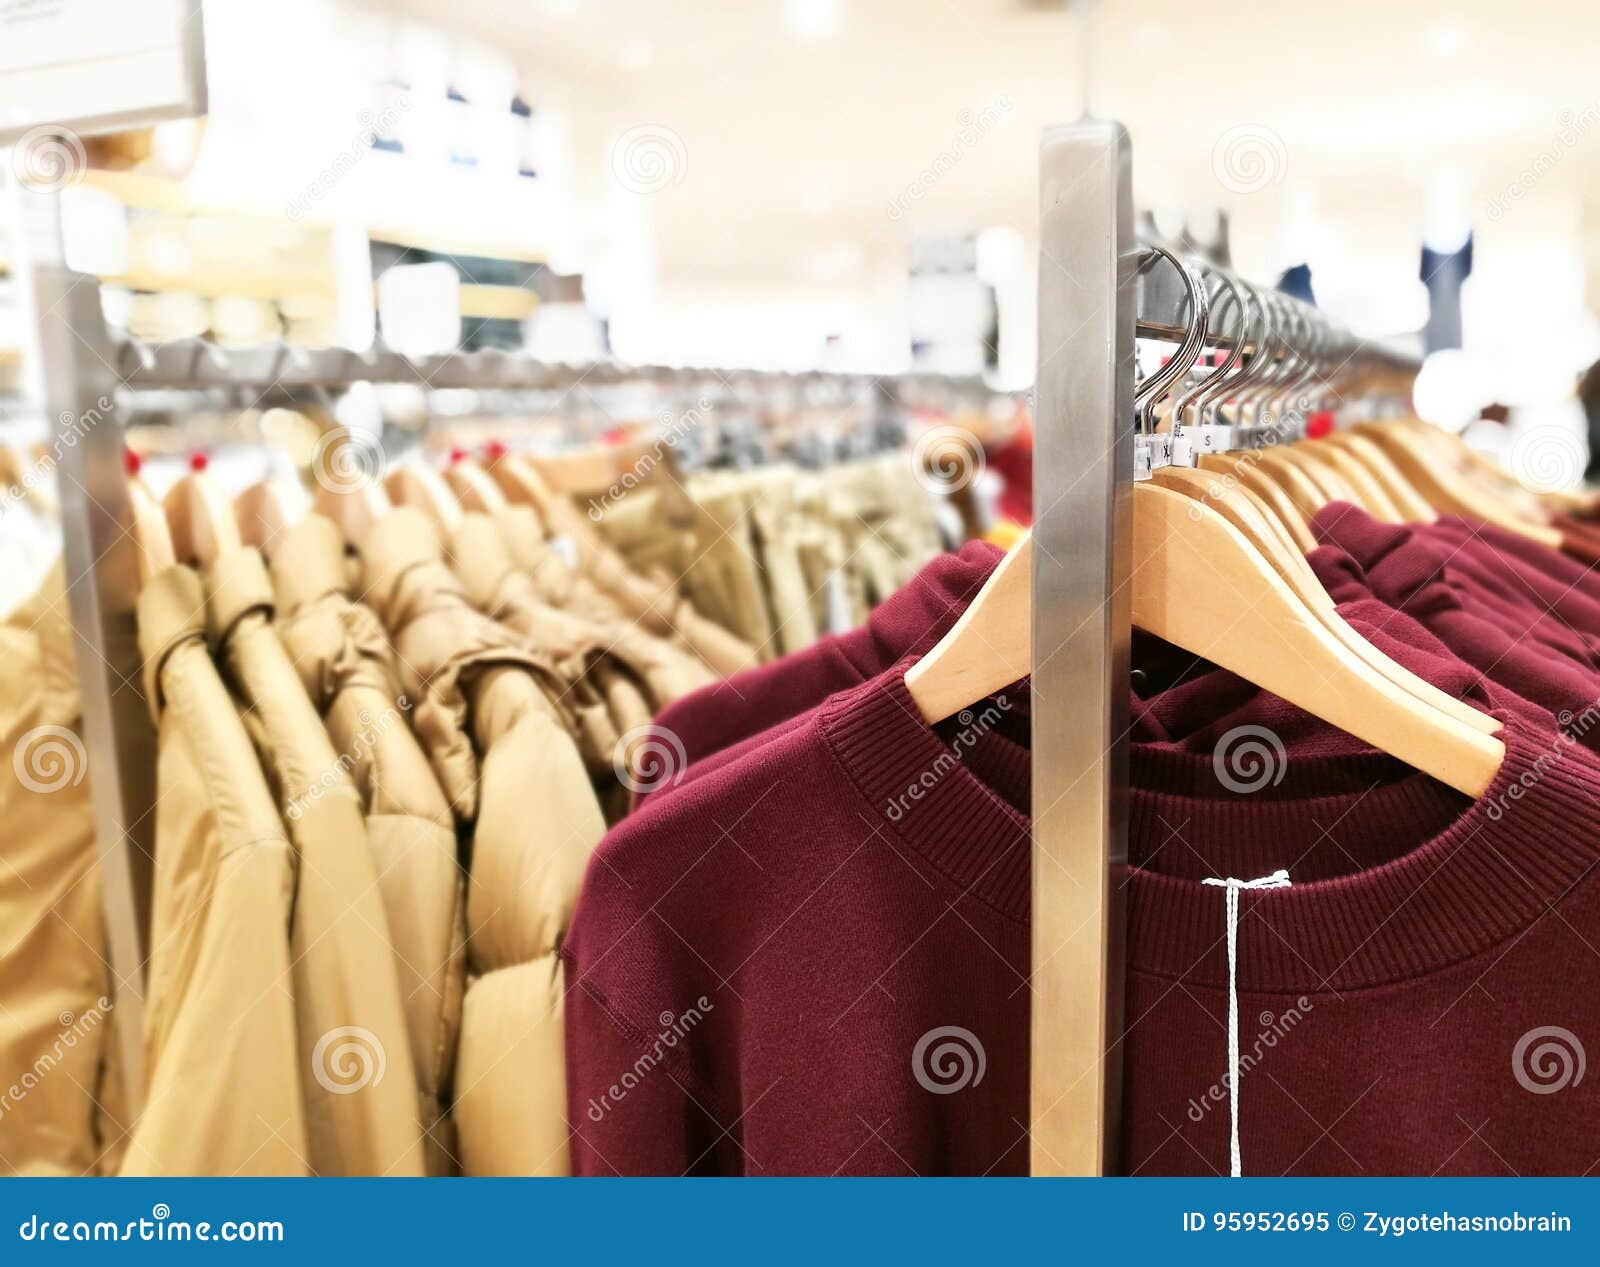 Clothes Hanging In The Railing, Showing Size Stock Image - Image of ...